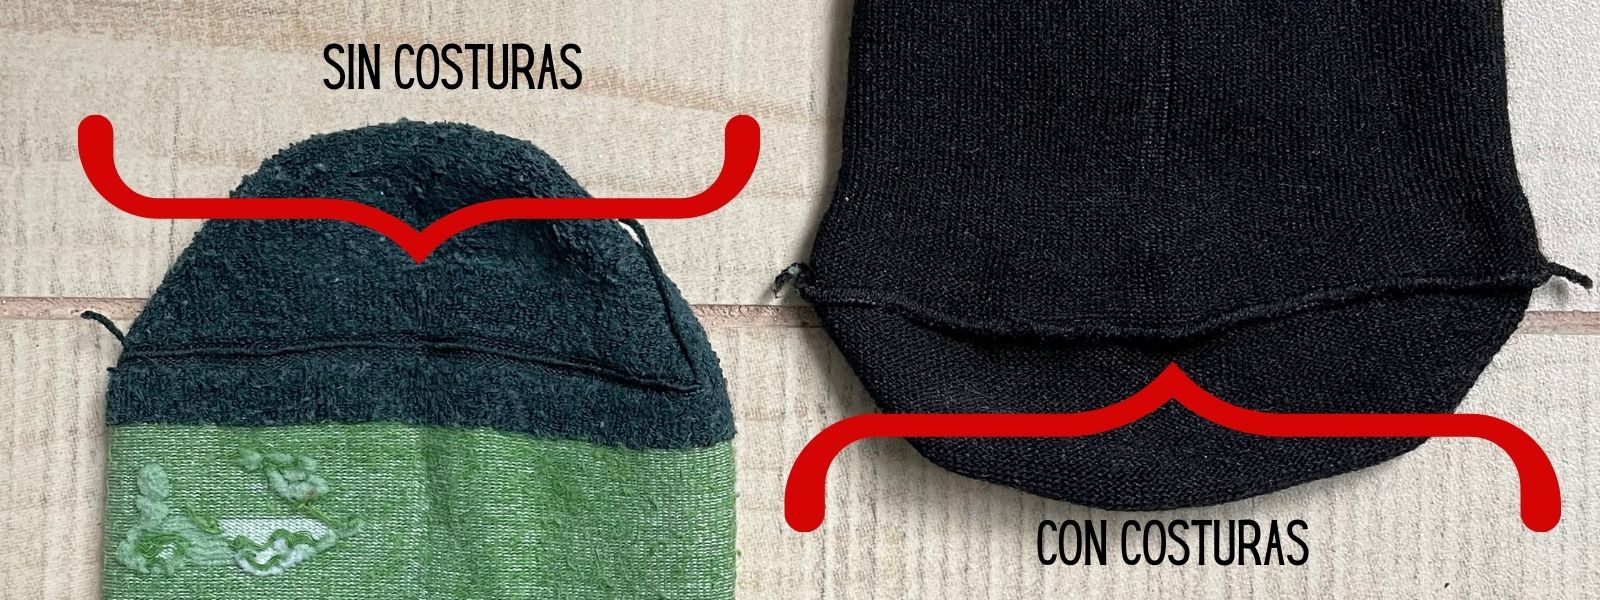 Calcetines o costuras? – The Sock's Closet